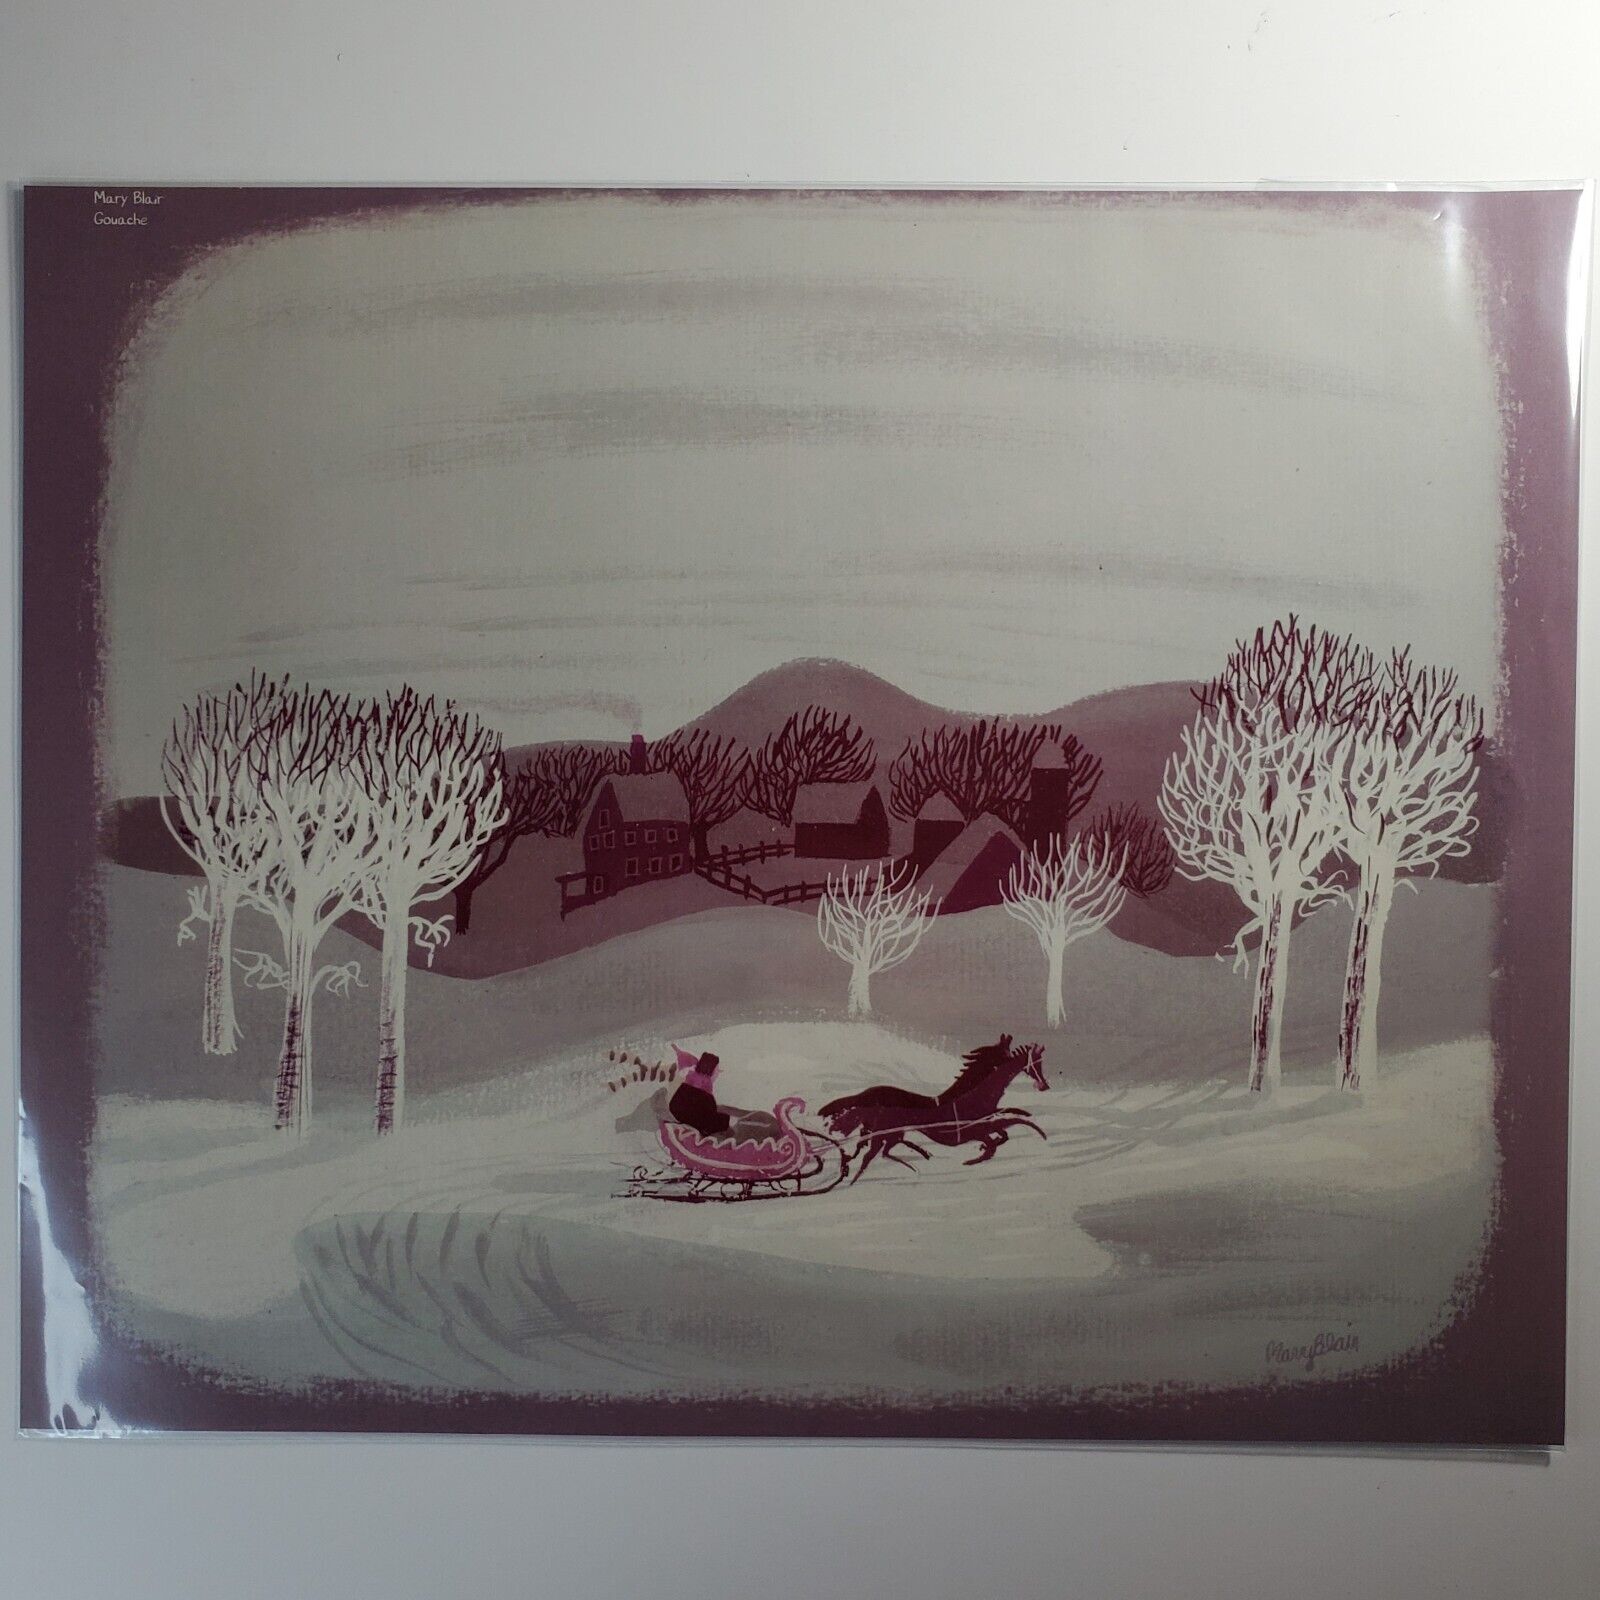 Mary Blair Lithograph Disney Poster Melody Time Once Upon a Wintertime Concept